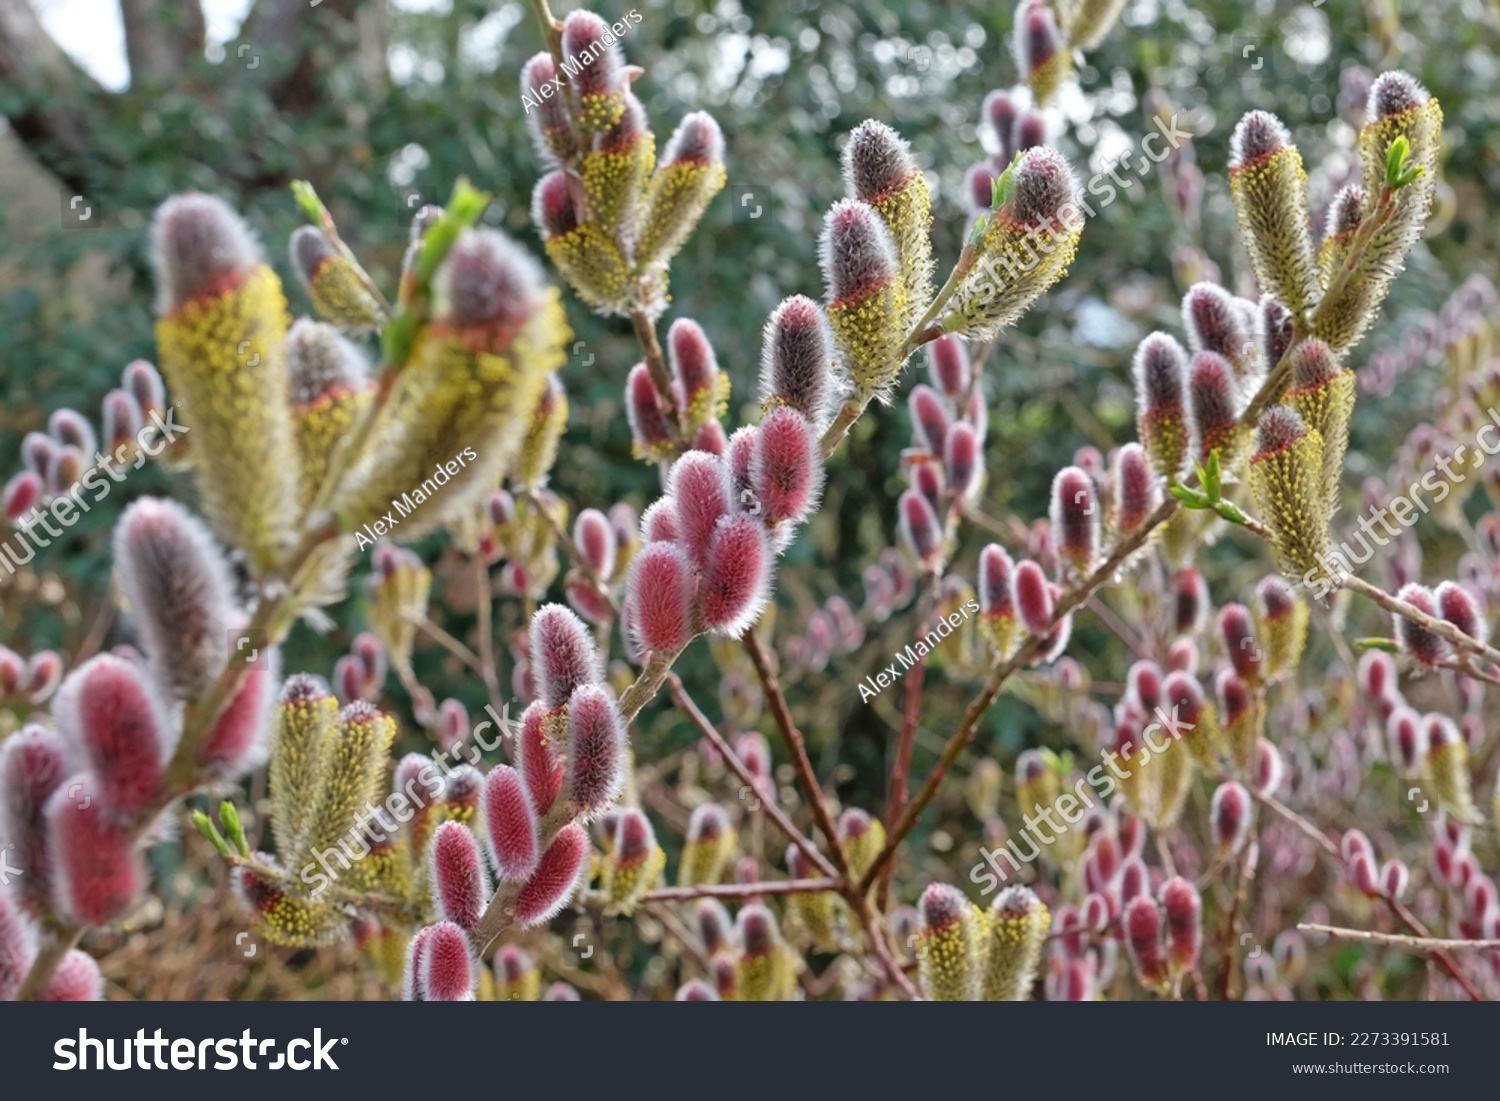 The red catkins of Salix gracilistyla 'Mount AsoÕ.  #2273391581